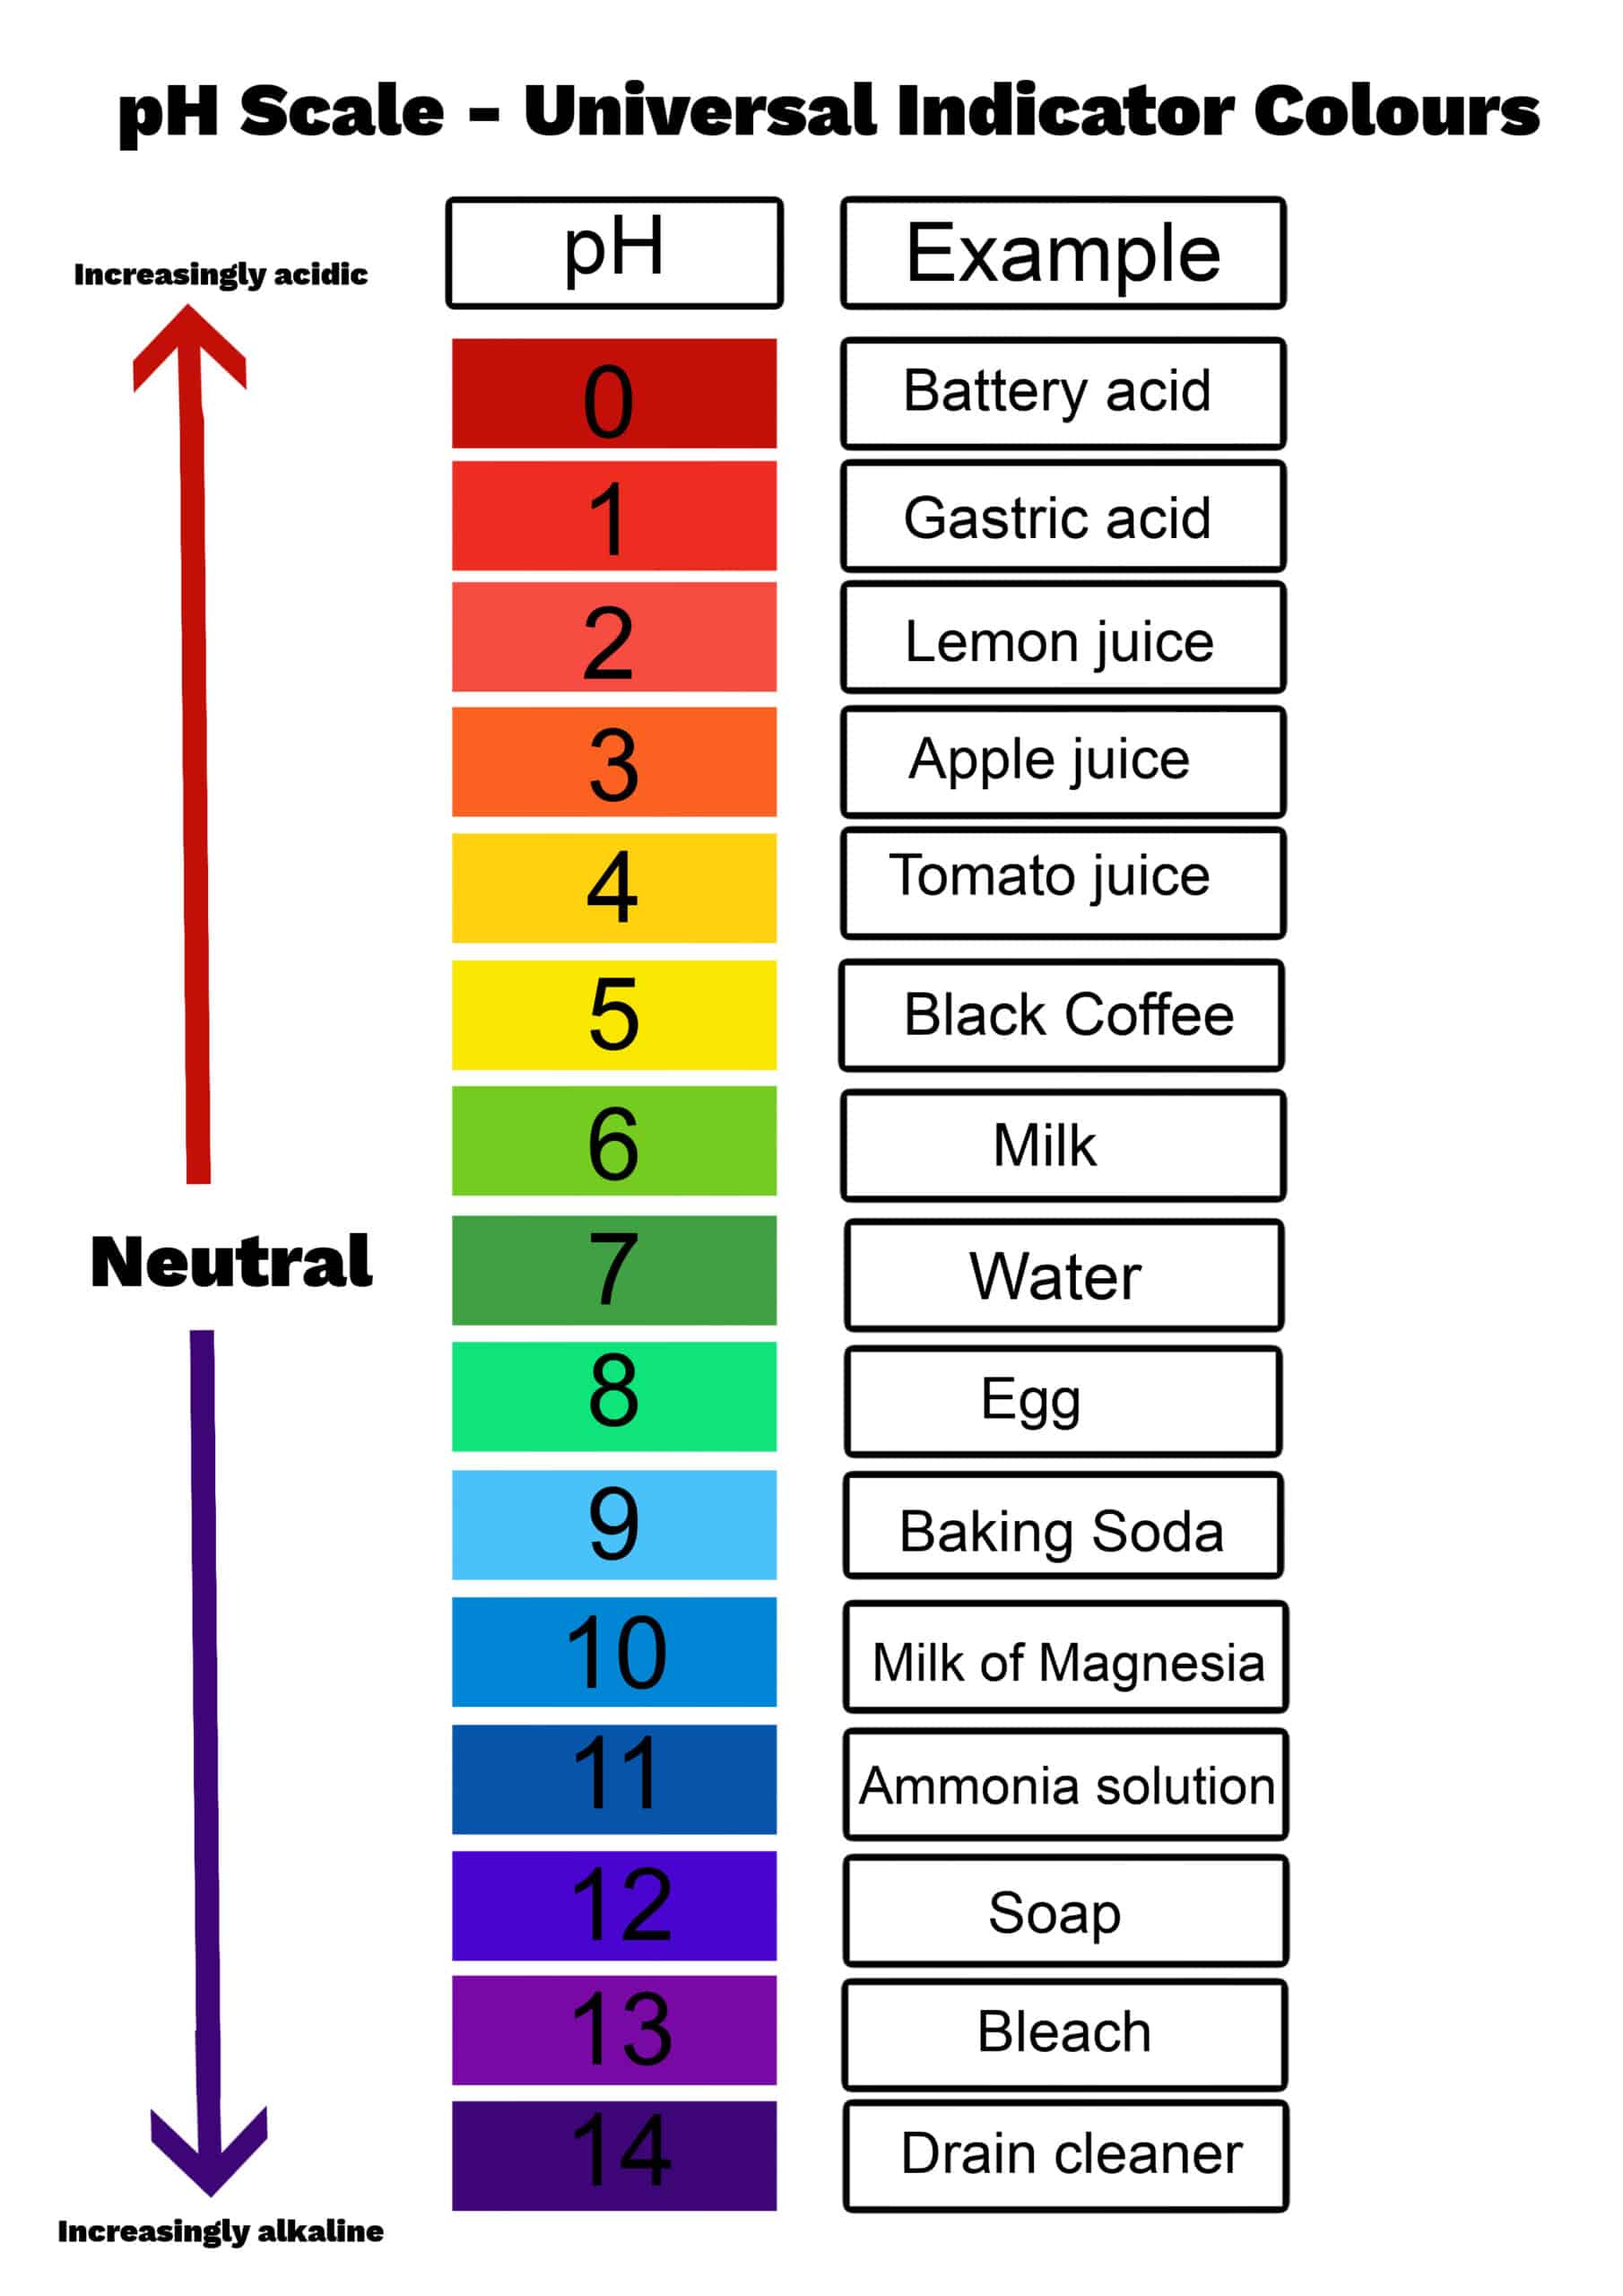 What is the pH Scale?